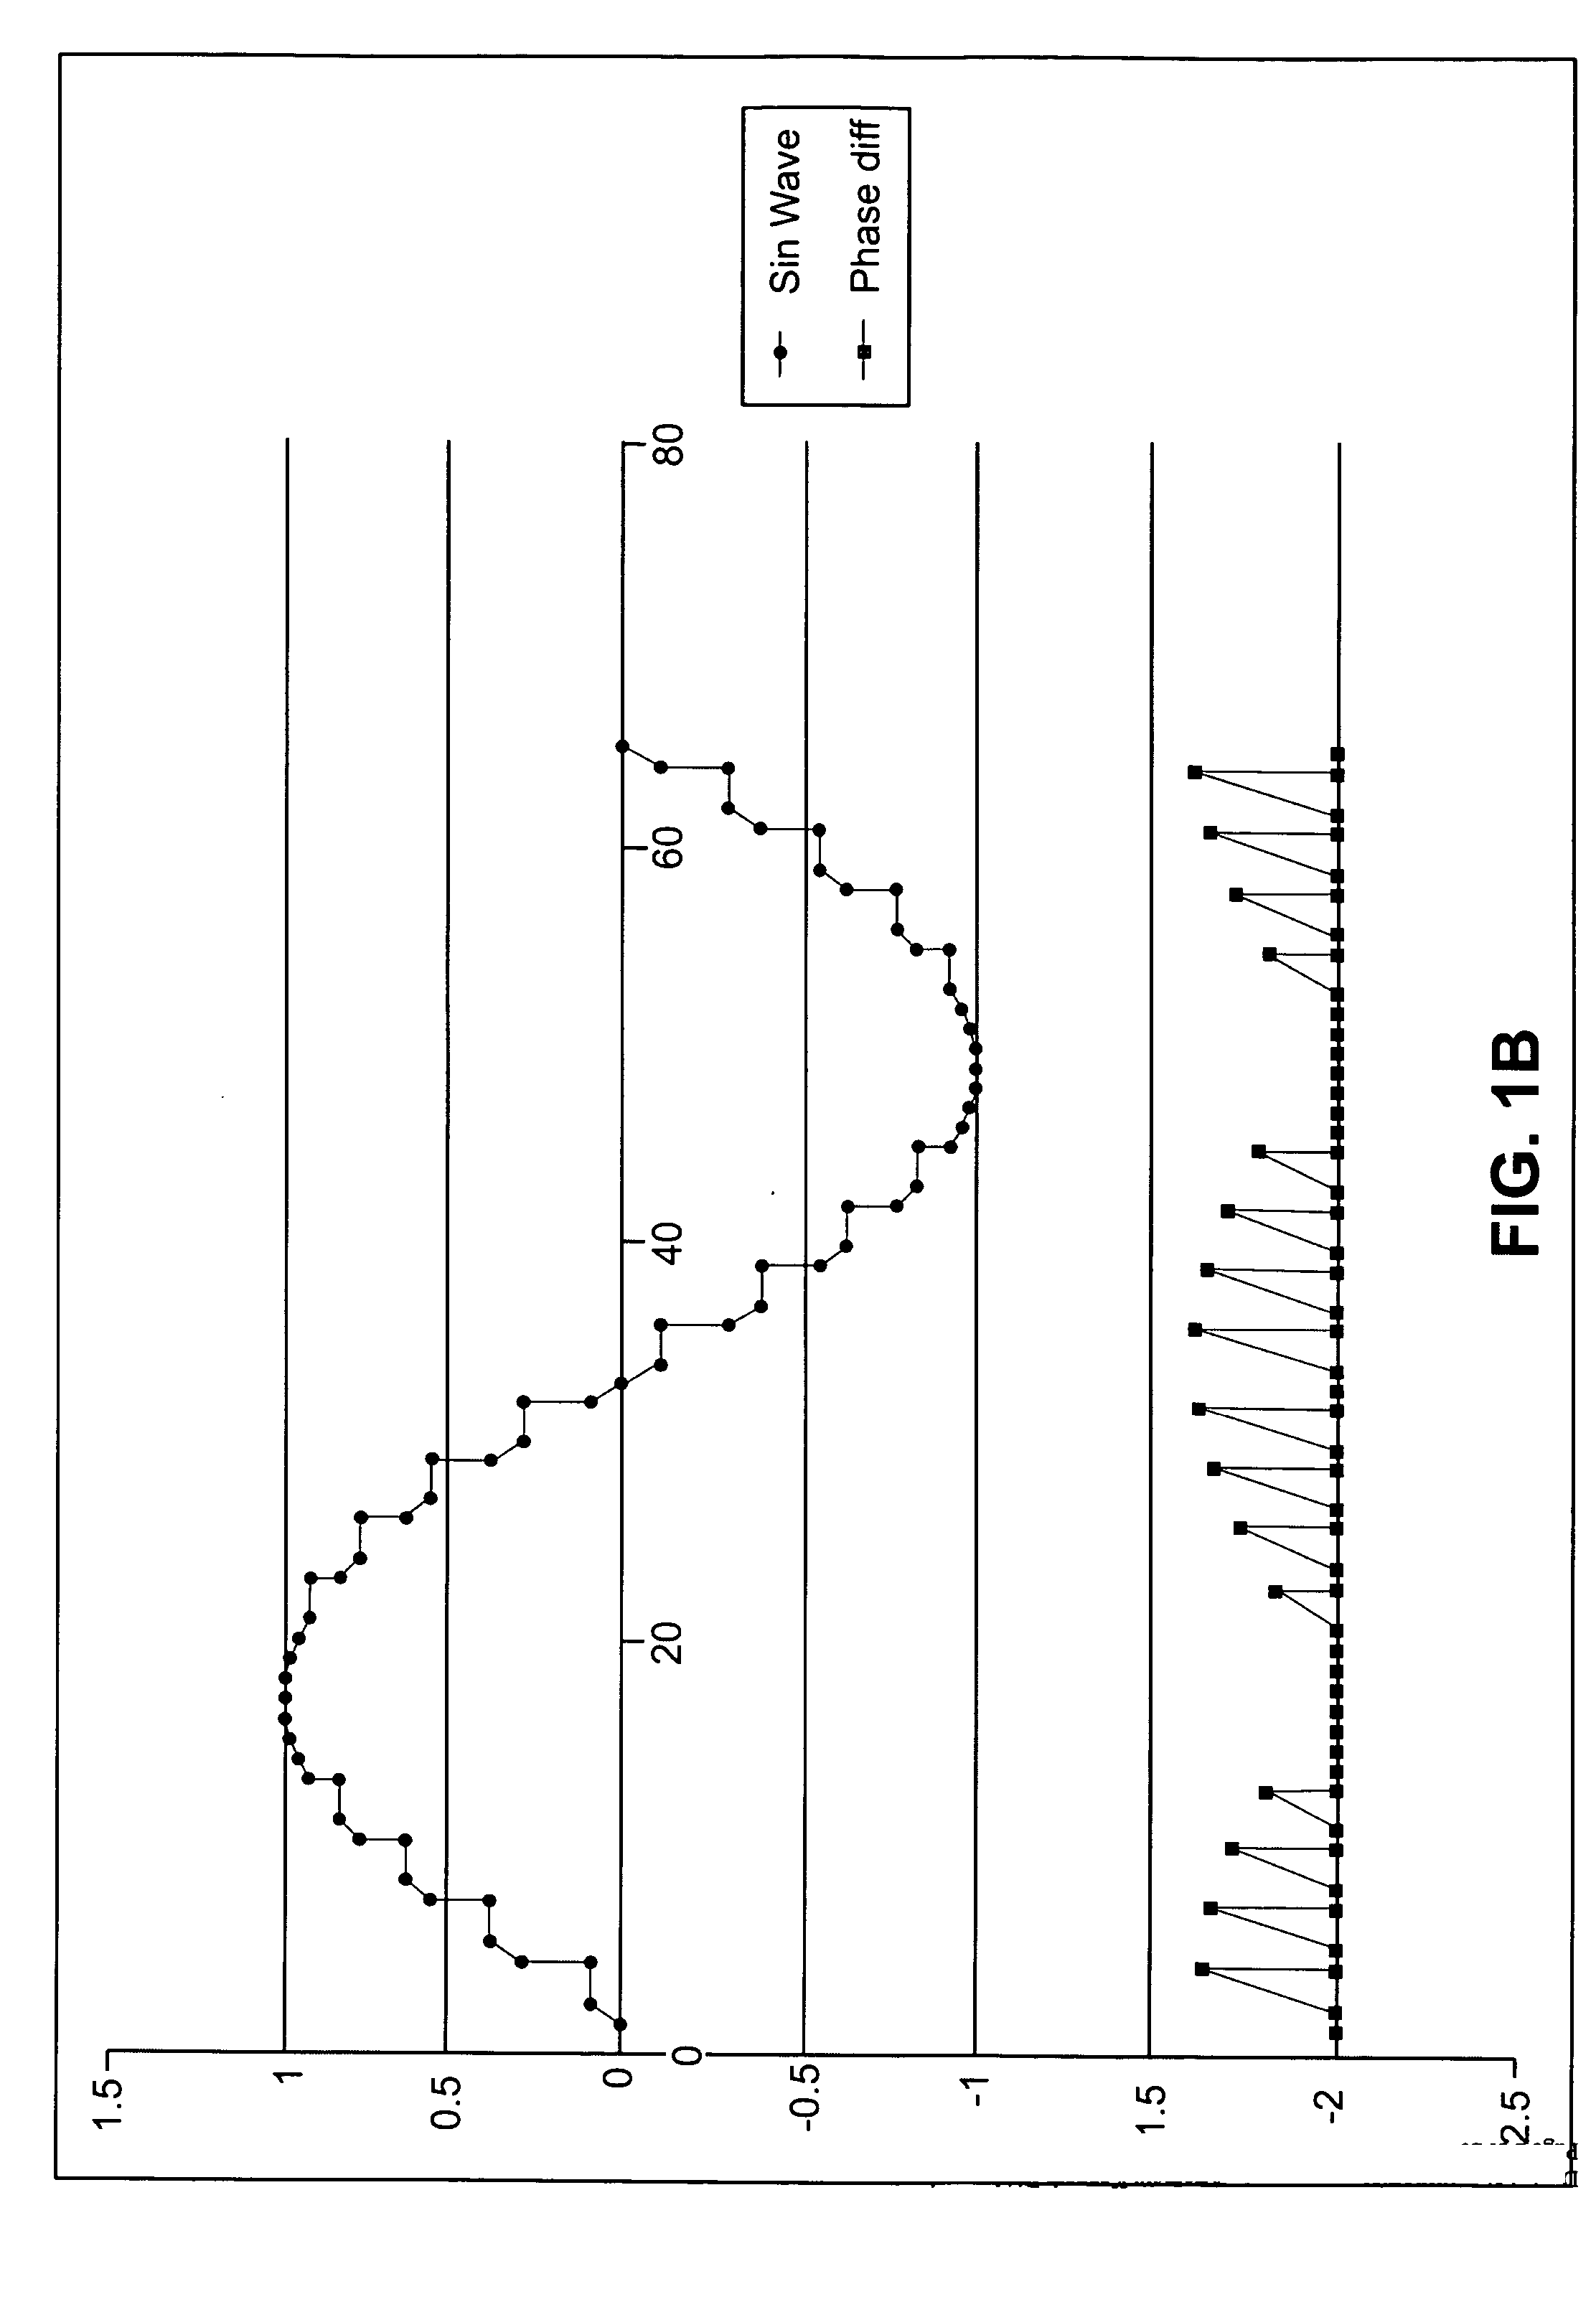 Coaxial cable communications systems and apparatus employing single and multiple sinewave modulation and demodulation techniques